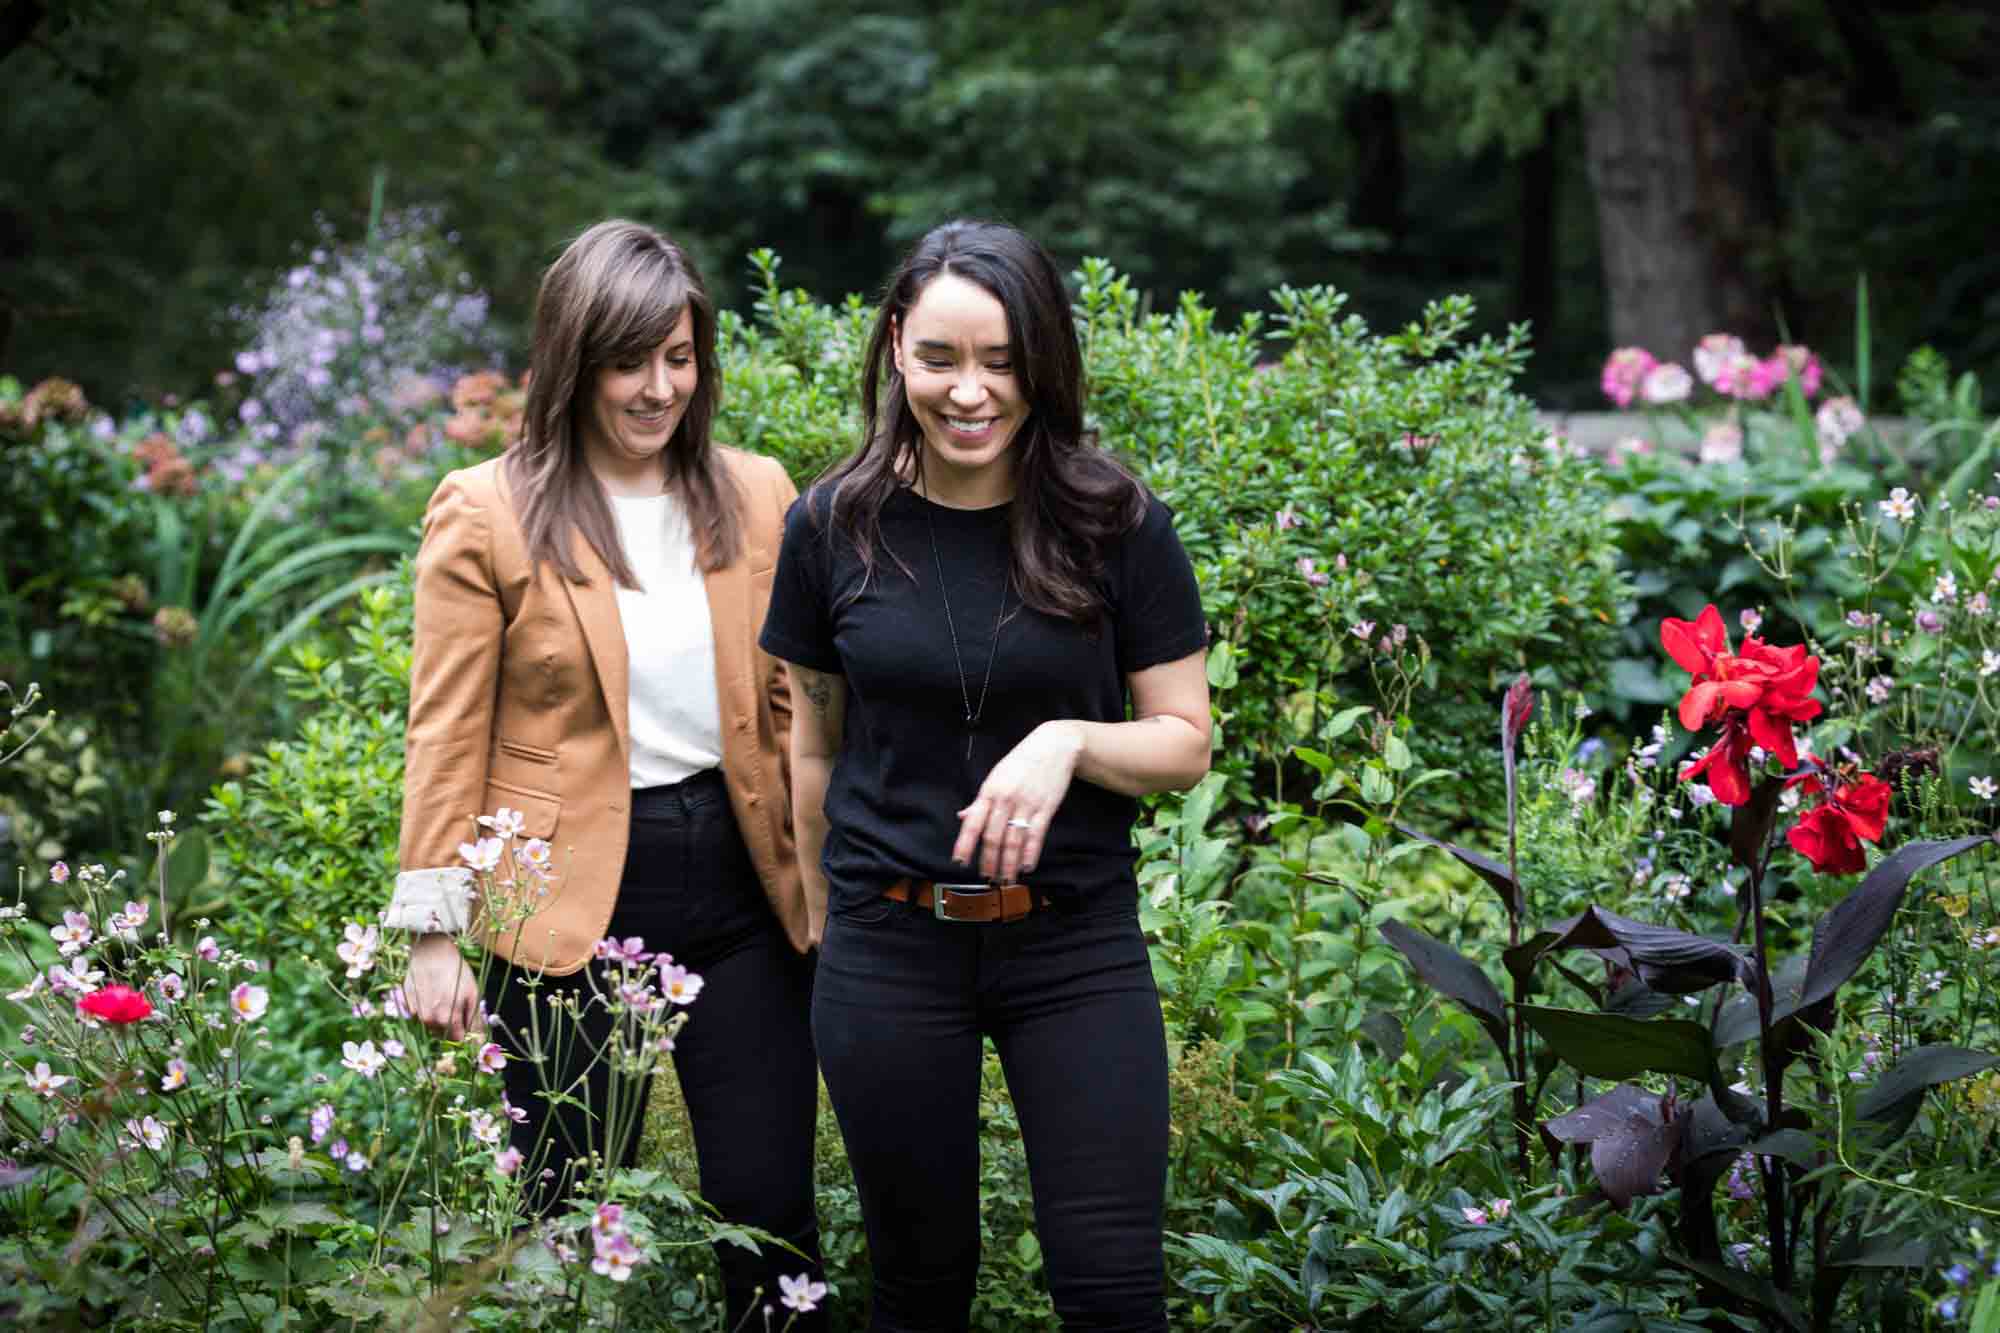 Two women walking through green foliage and flowers for an article on how to produce a movie-themed surprise proposal